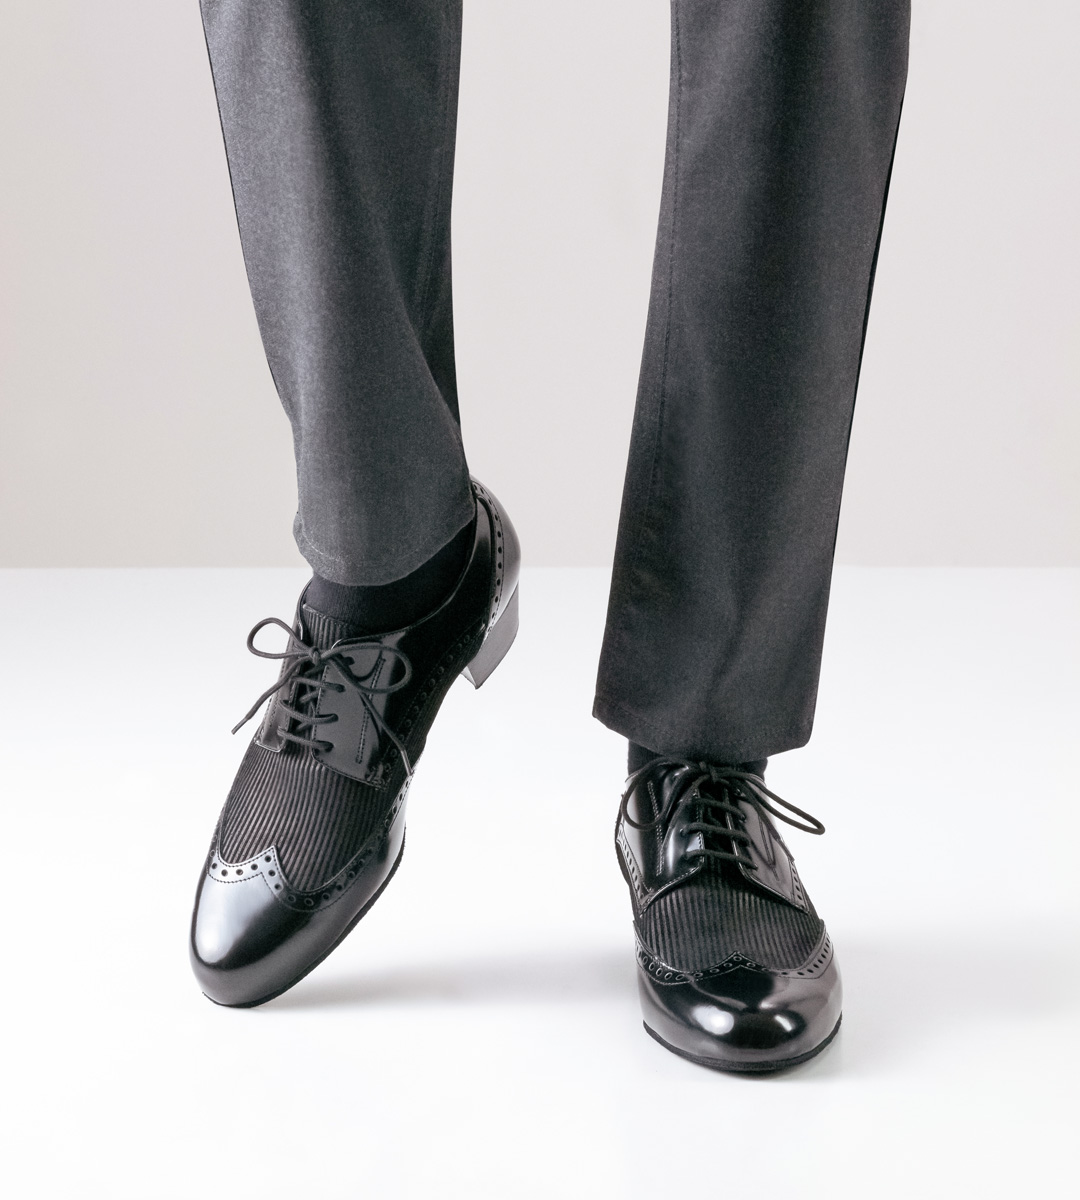 Men's dance shoe by Nueva Epoca in leather and suede in combination with grey trousers